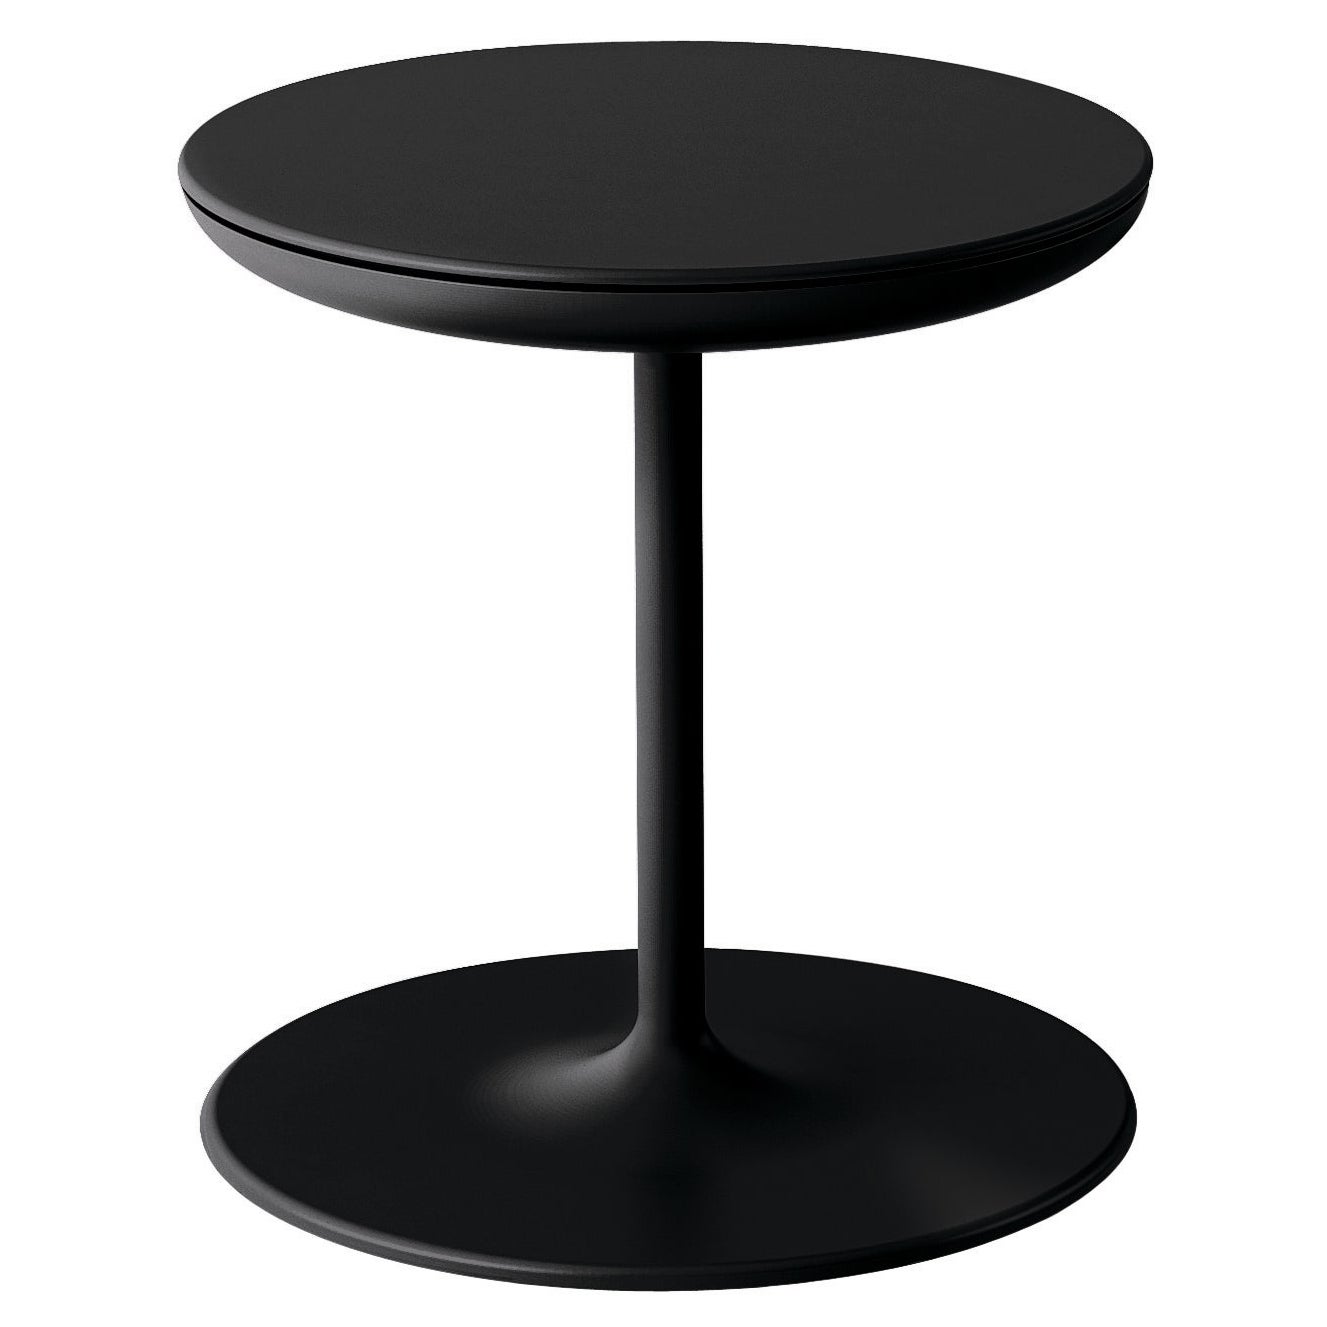 Zanotta Toi Small Table in Black Finish with Plywood Top by Salvatore Indriolo